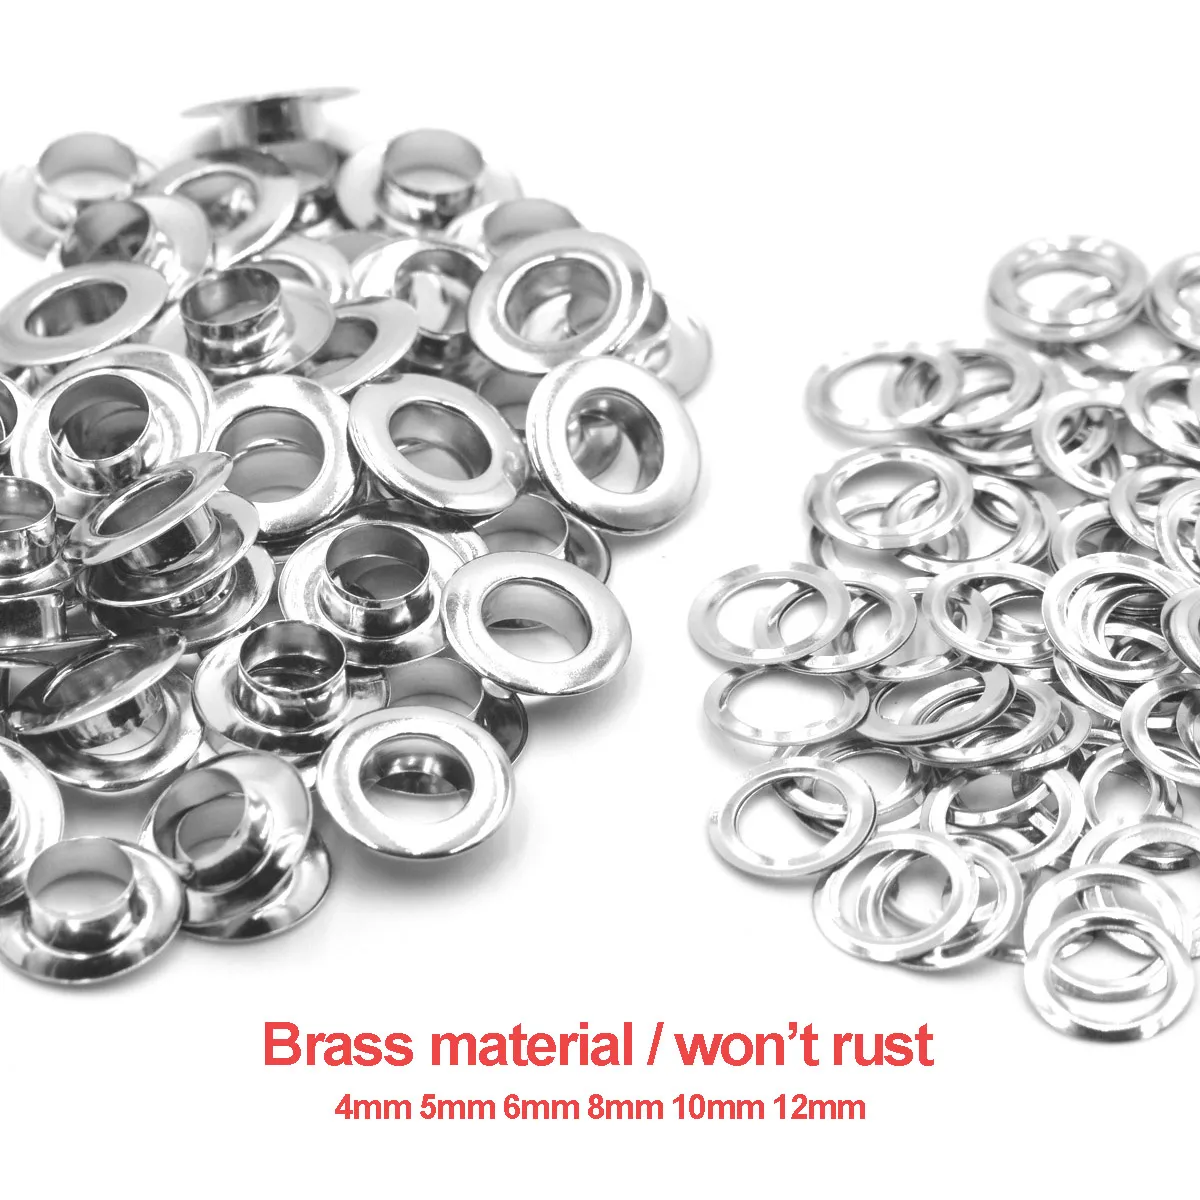 Brass Material Silver Color 4mm 5mm 6mm 8mm 10mm 12mm Flat Face Grommet Eyelet With Washer Leather Craft Bags Shoes Belt Cap